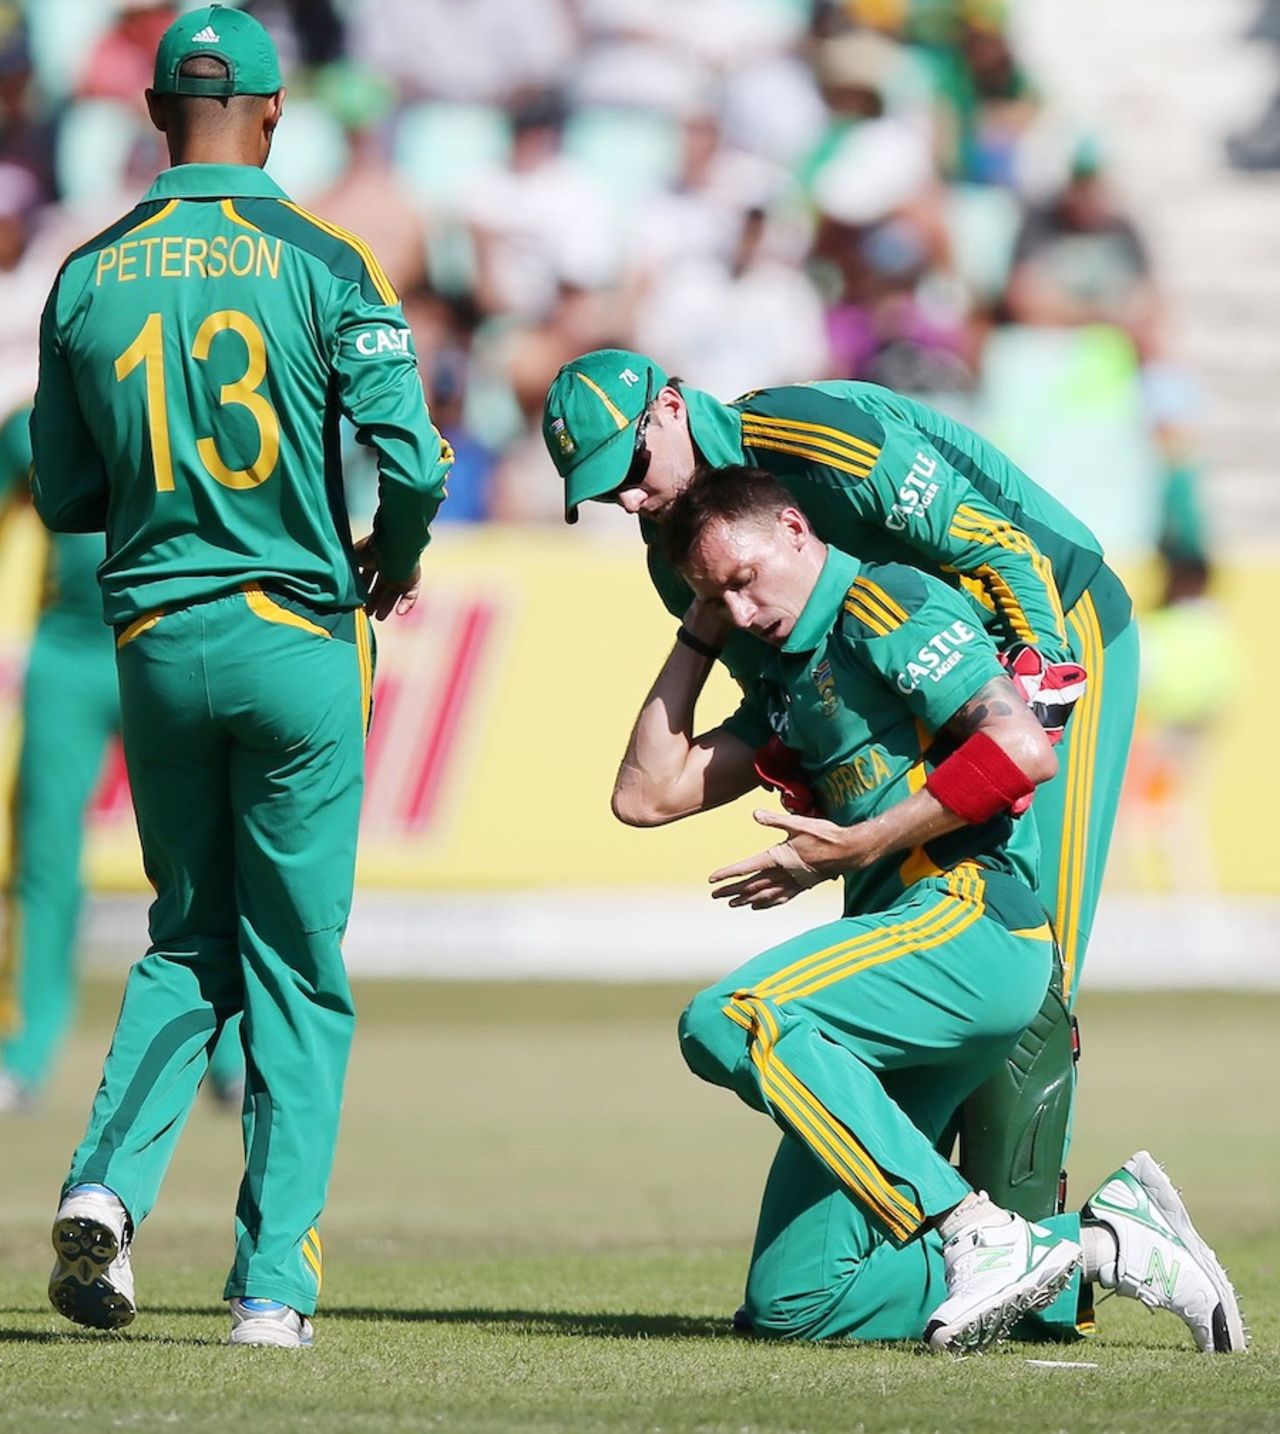 Dale Steyn receives attention after injuring his shoulder , South Africa v Pakistan, 4th ODI, Durban, March 21, 2013